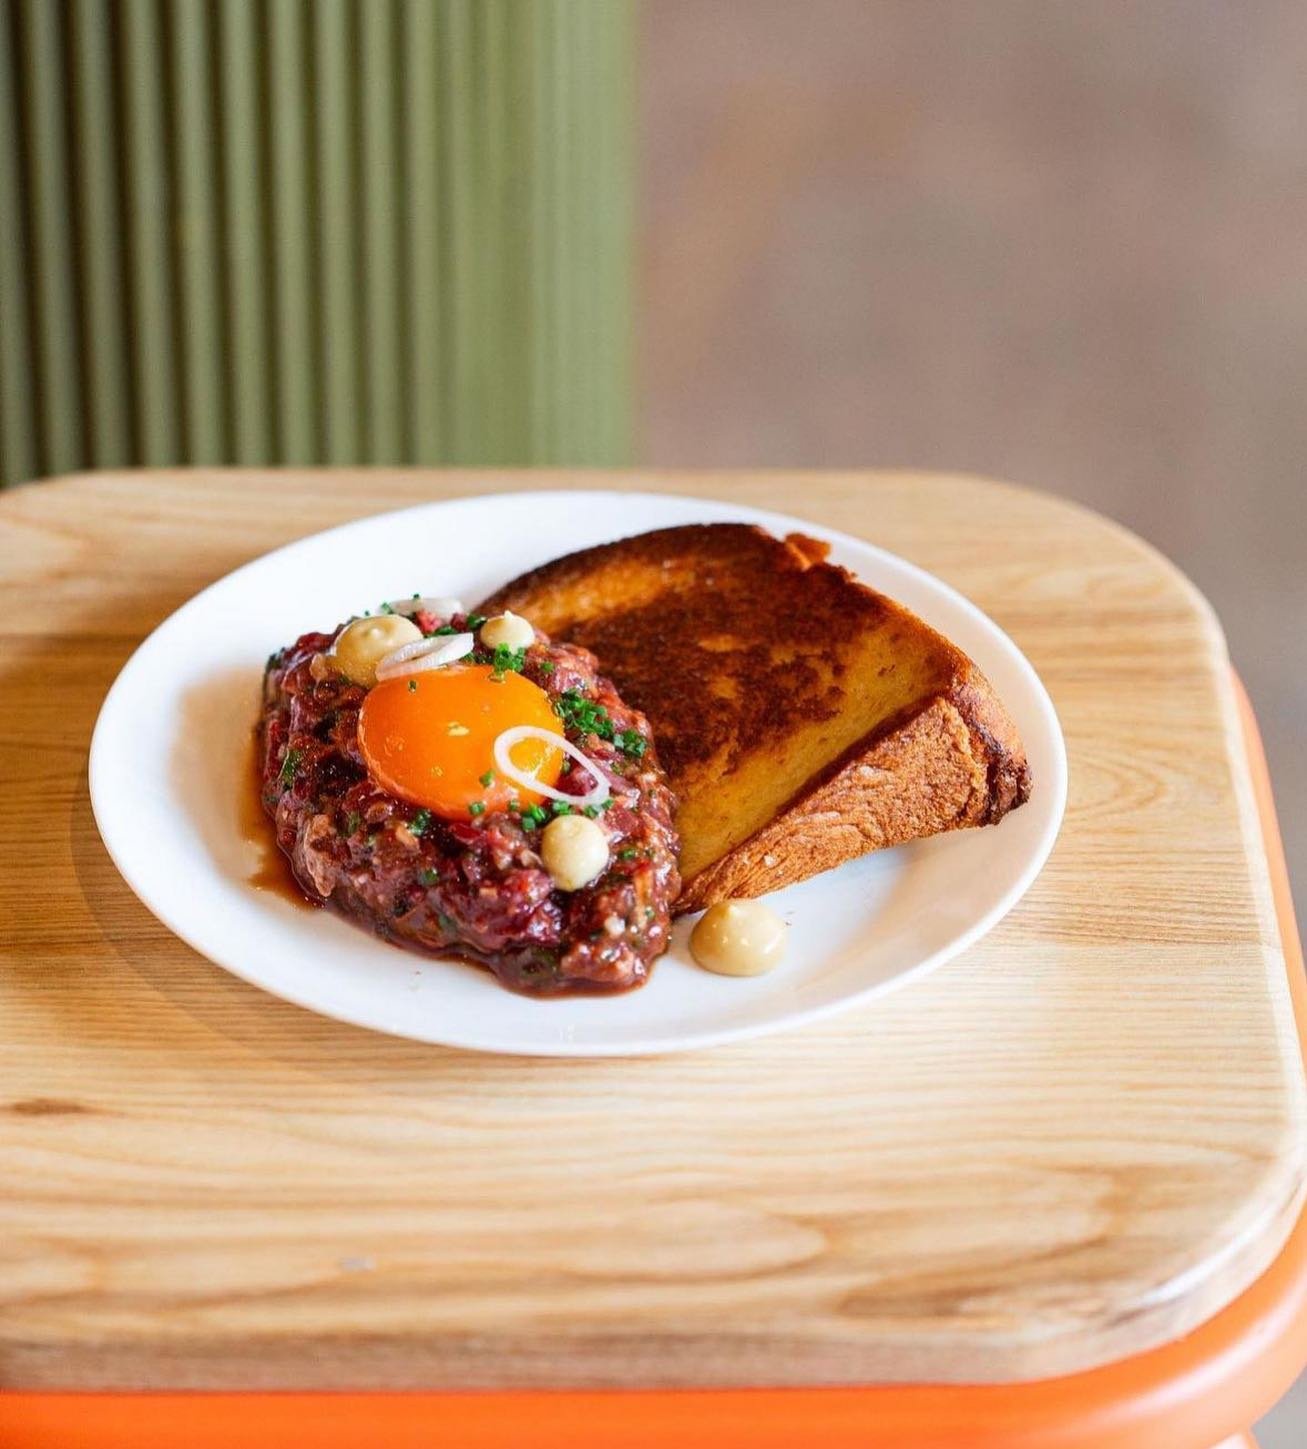 Chef Zeus&rsquo;s beautiful Dedham Vale steak tartare is back this week, served with confit St Ewe&rsquo;s egg yolk and toasted brioche. 
We&rsquo;ve got room for drinks, snacks and dinner tonight, book on Resy or just walk-in 

[📸 @aliedgephotograp